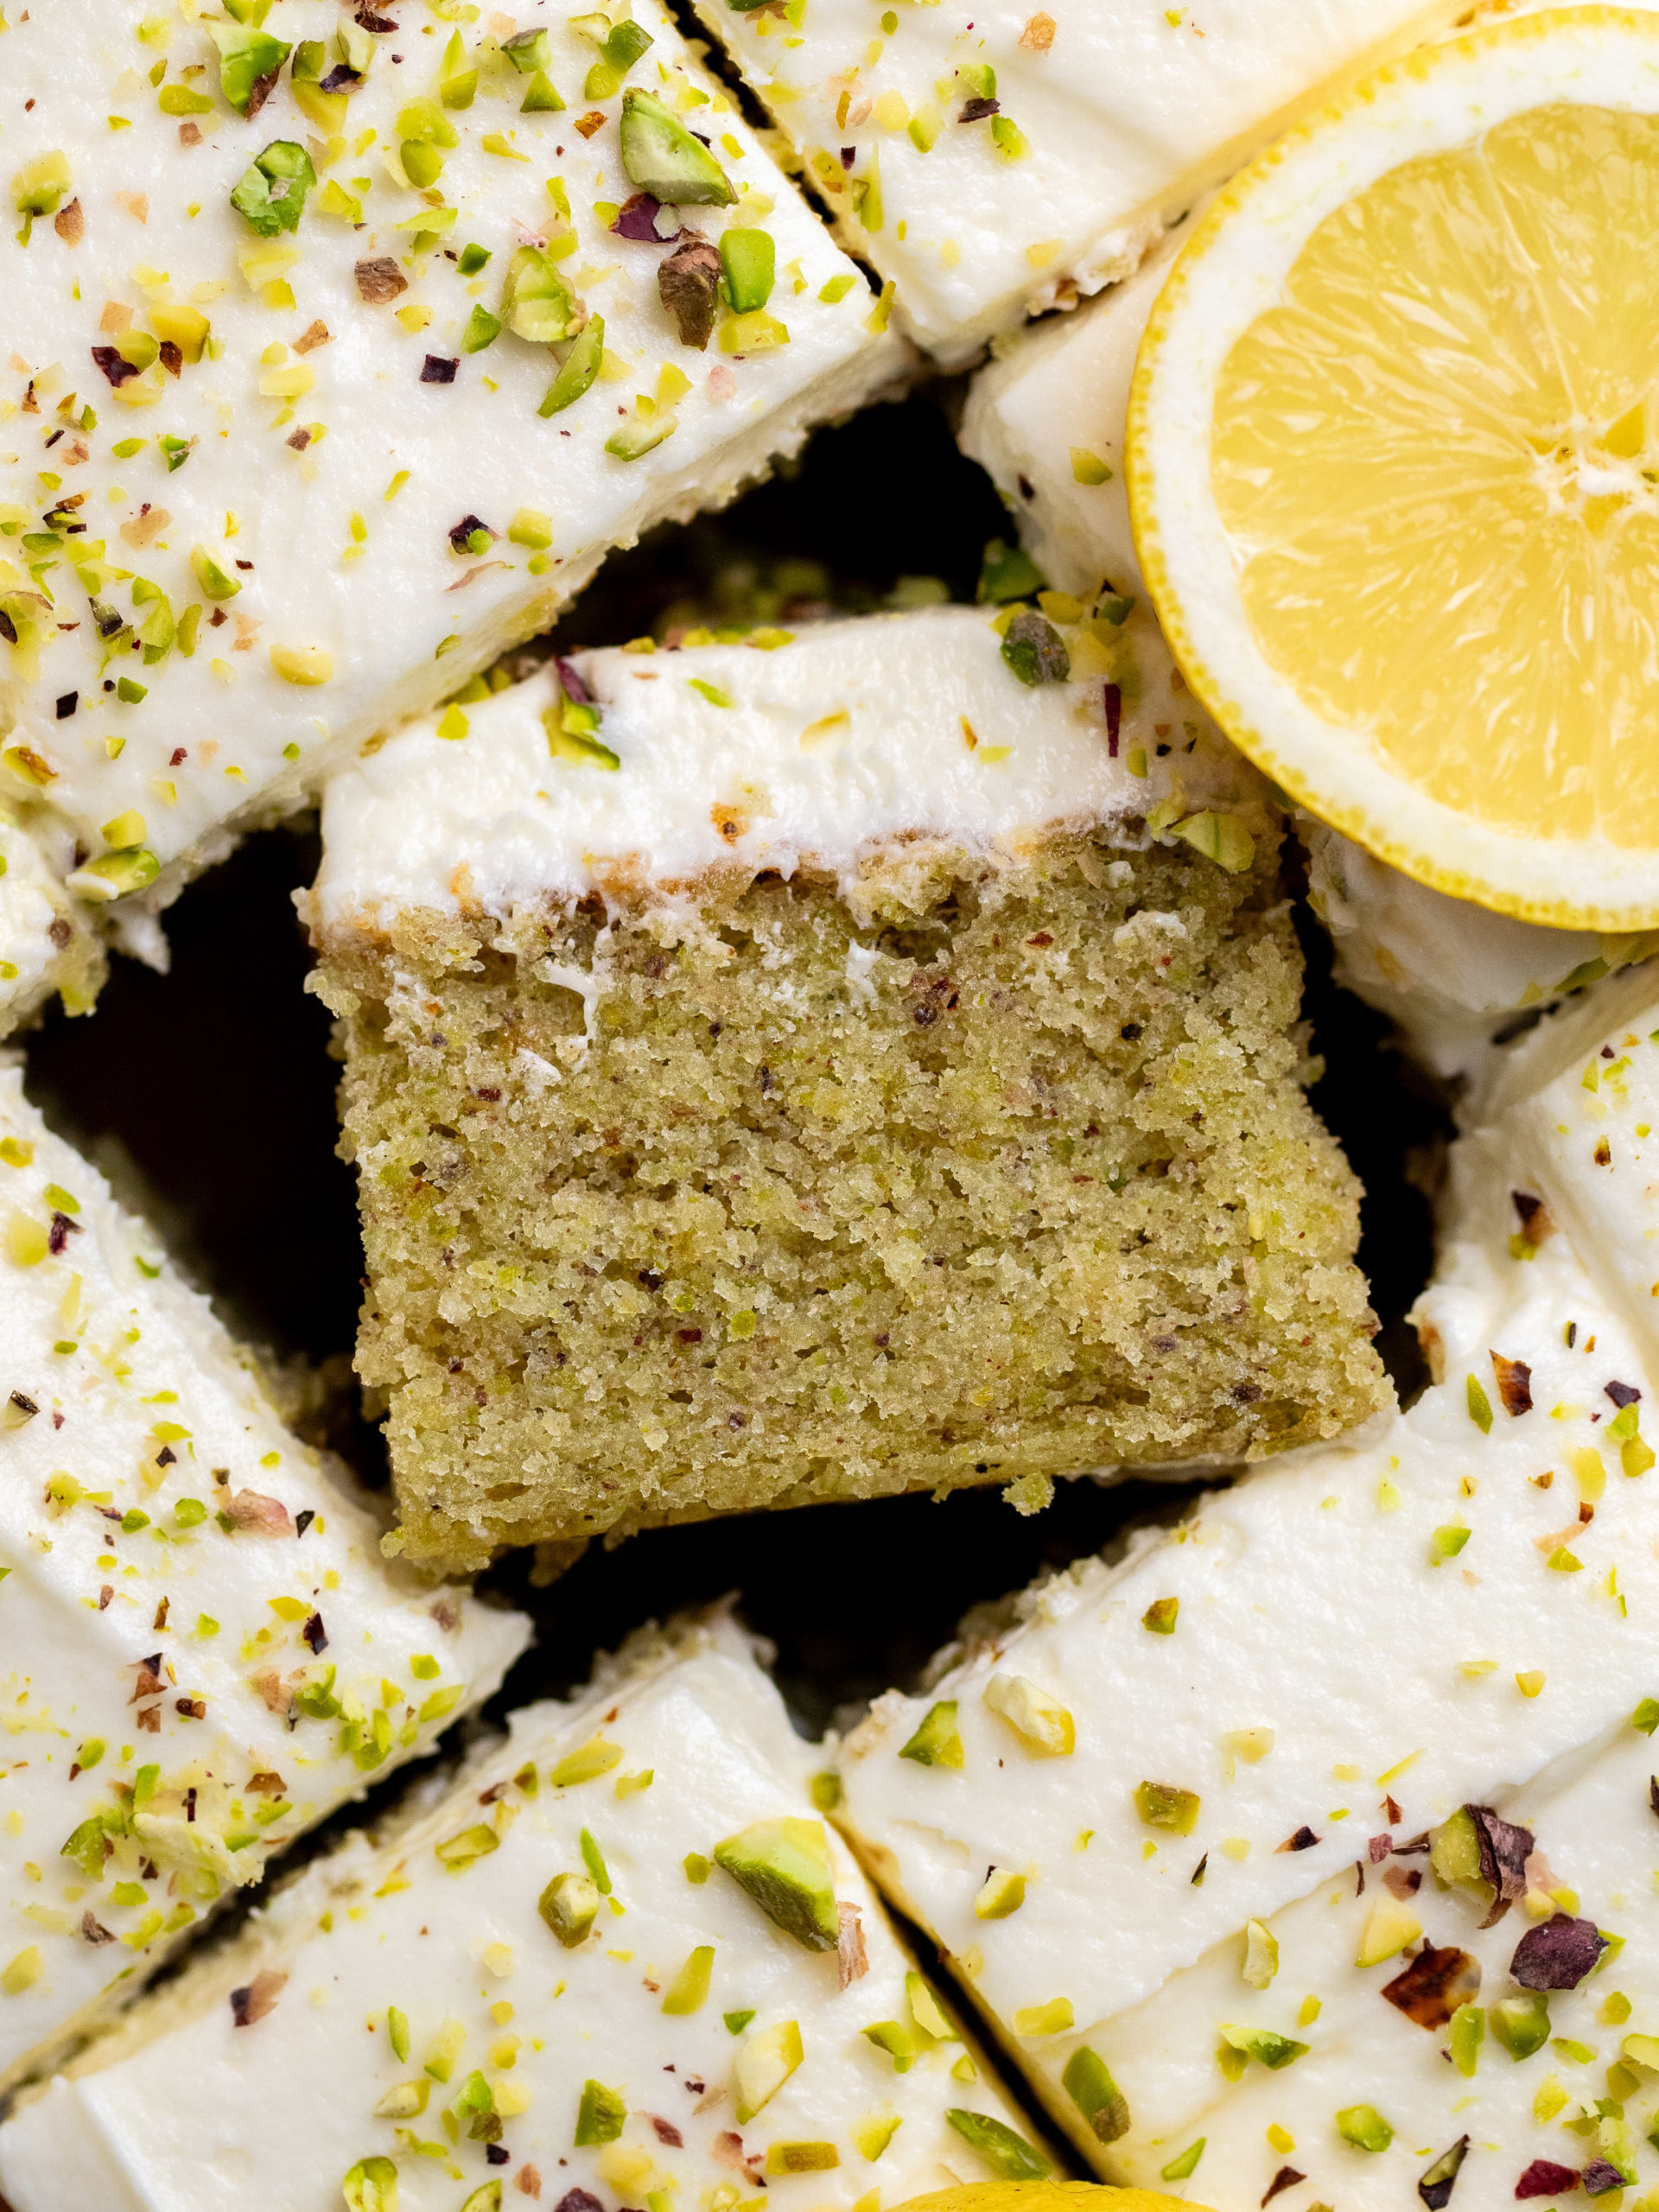 Pistachio Cake Recipe From Scratch (With Surprise Filling!) - YouTube